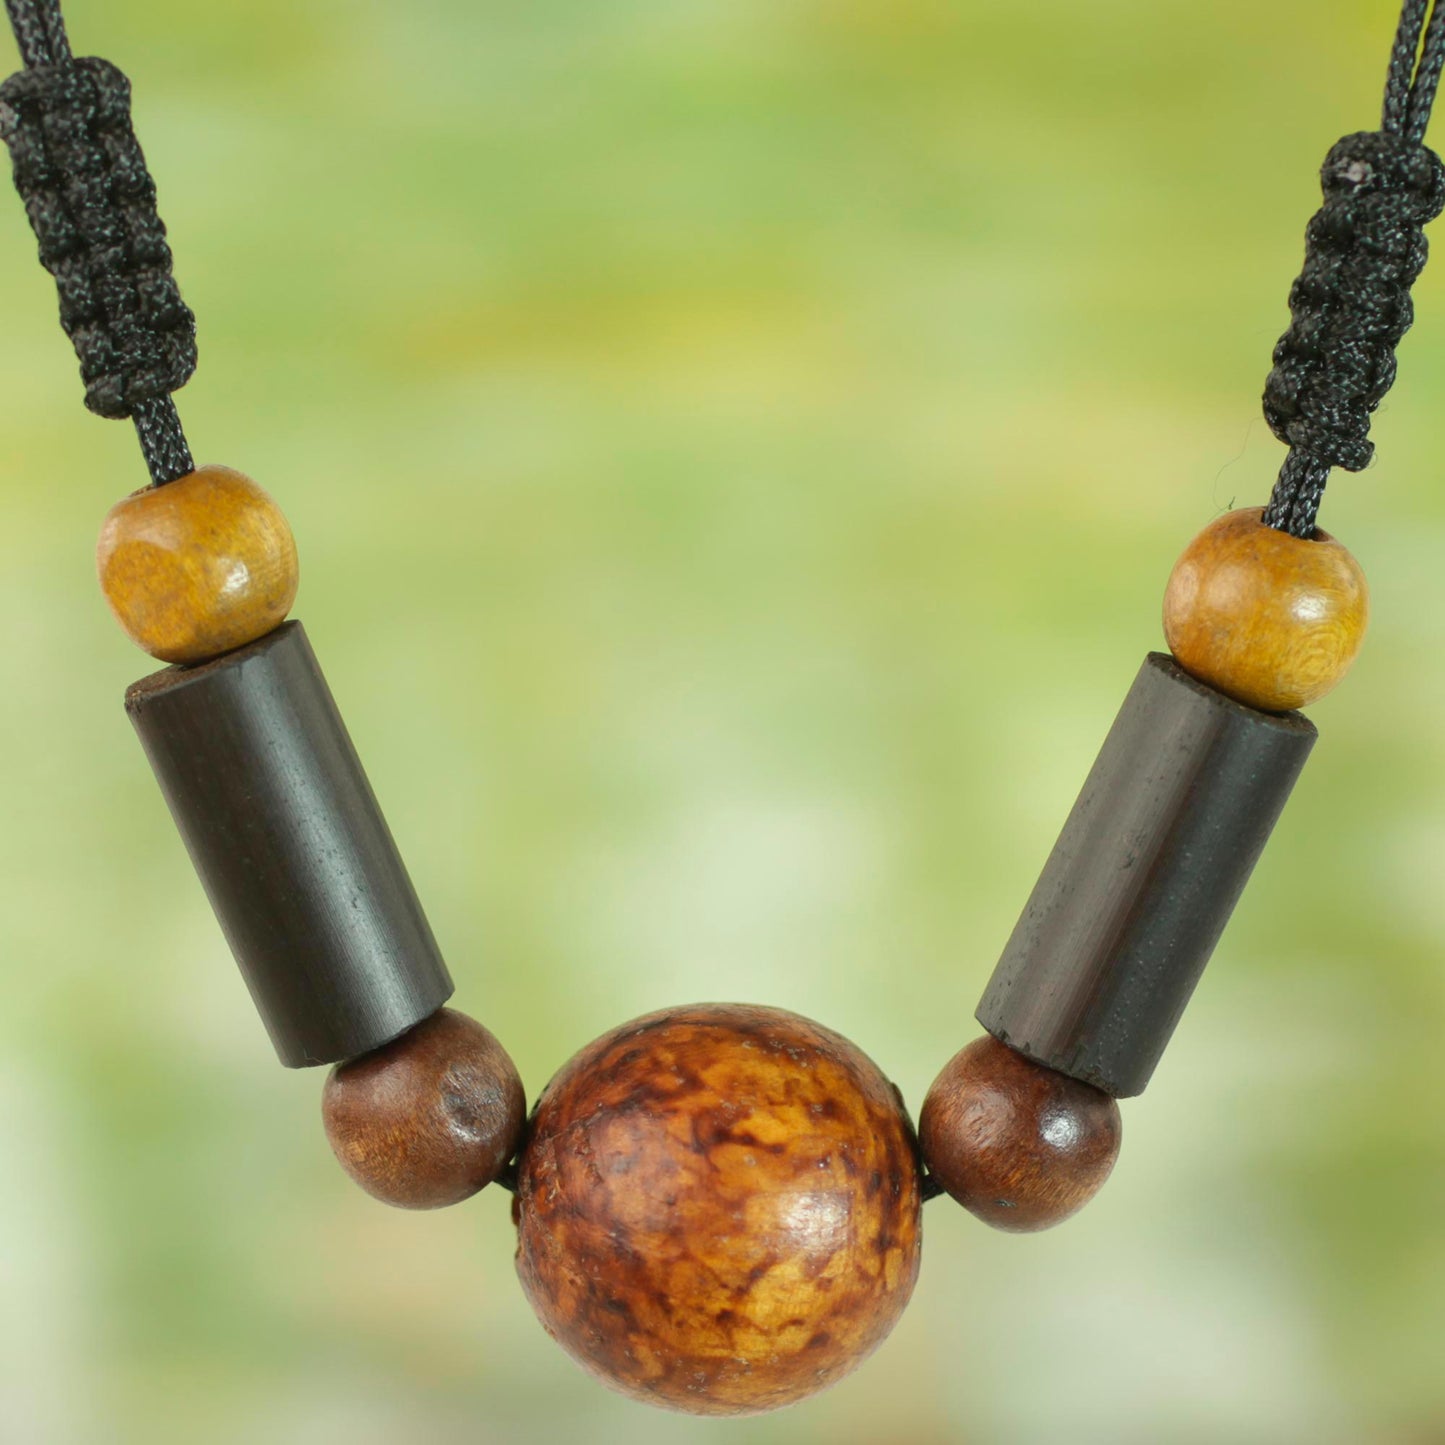 Round Might Sese Wood and Bamboo Cord Pendant Necklace from Ghana